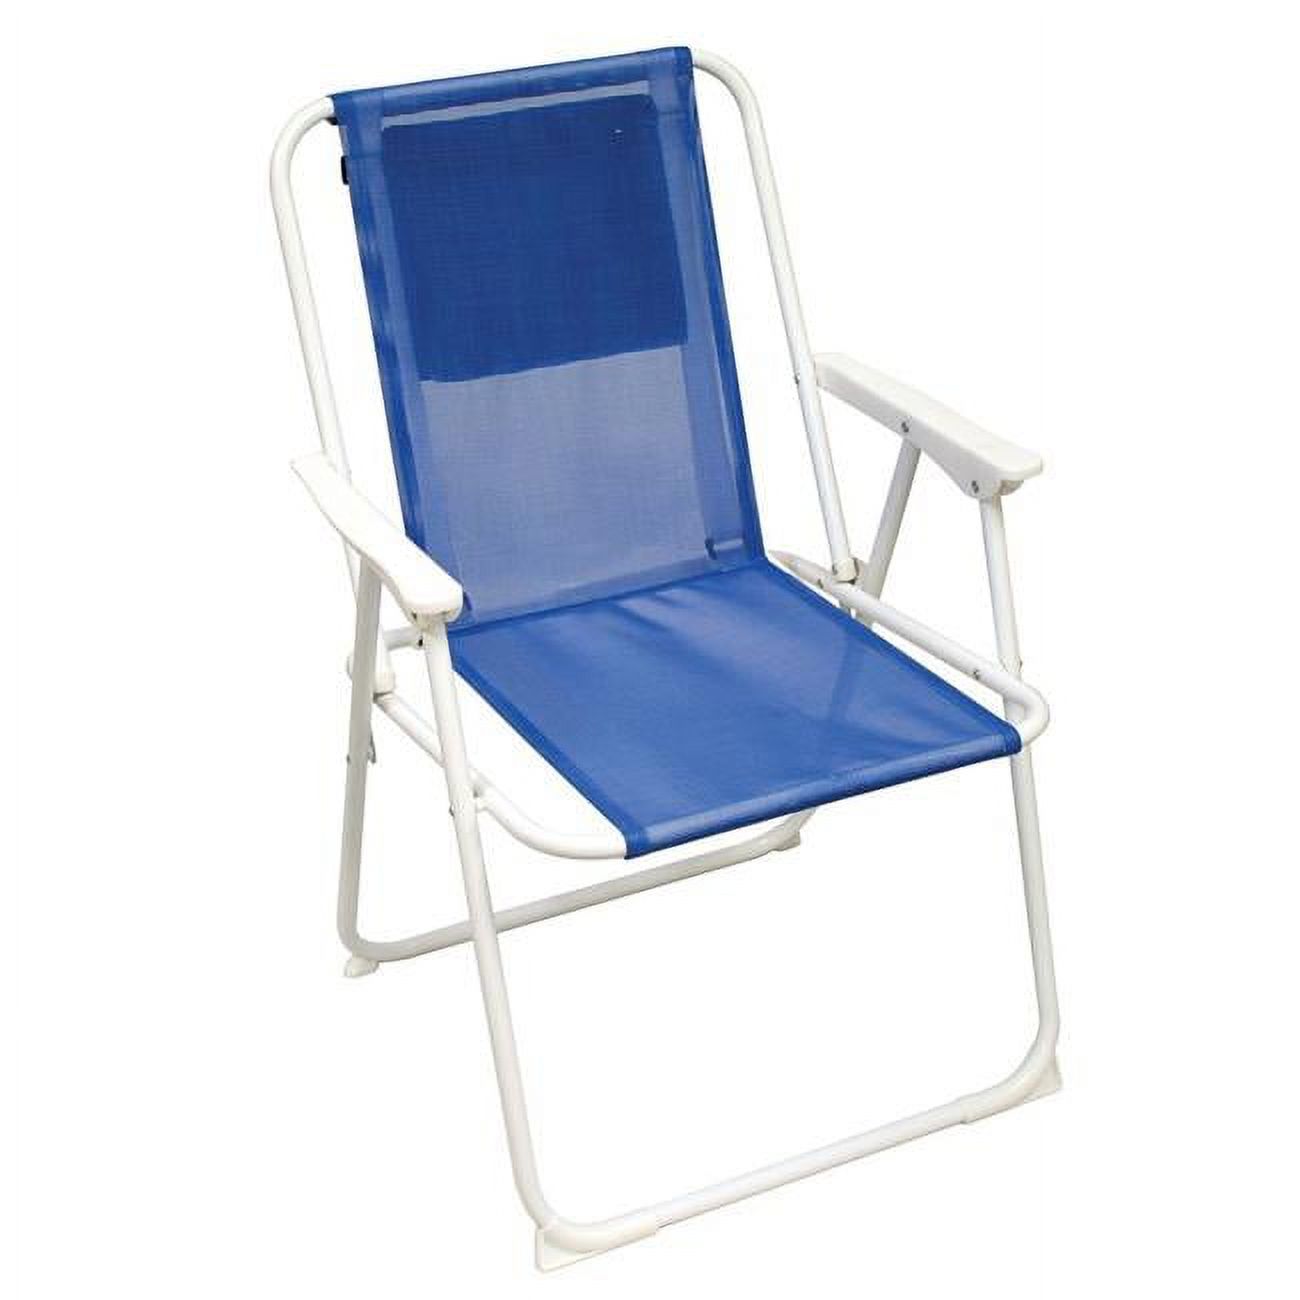 Preferred Nation Portable Beach Chair - image 1 of 2